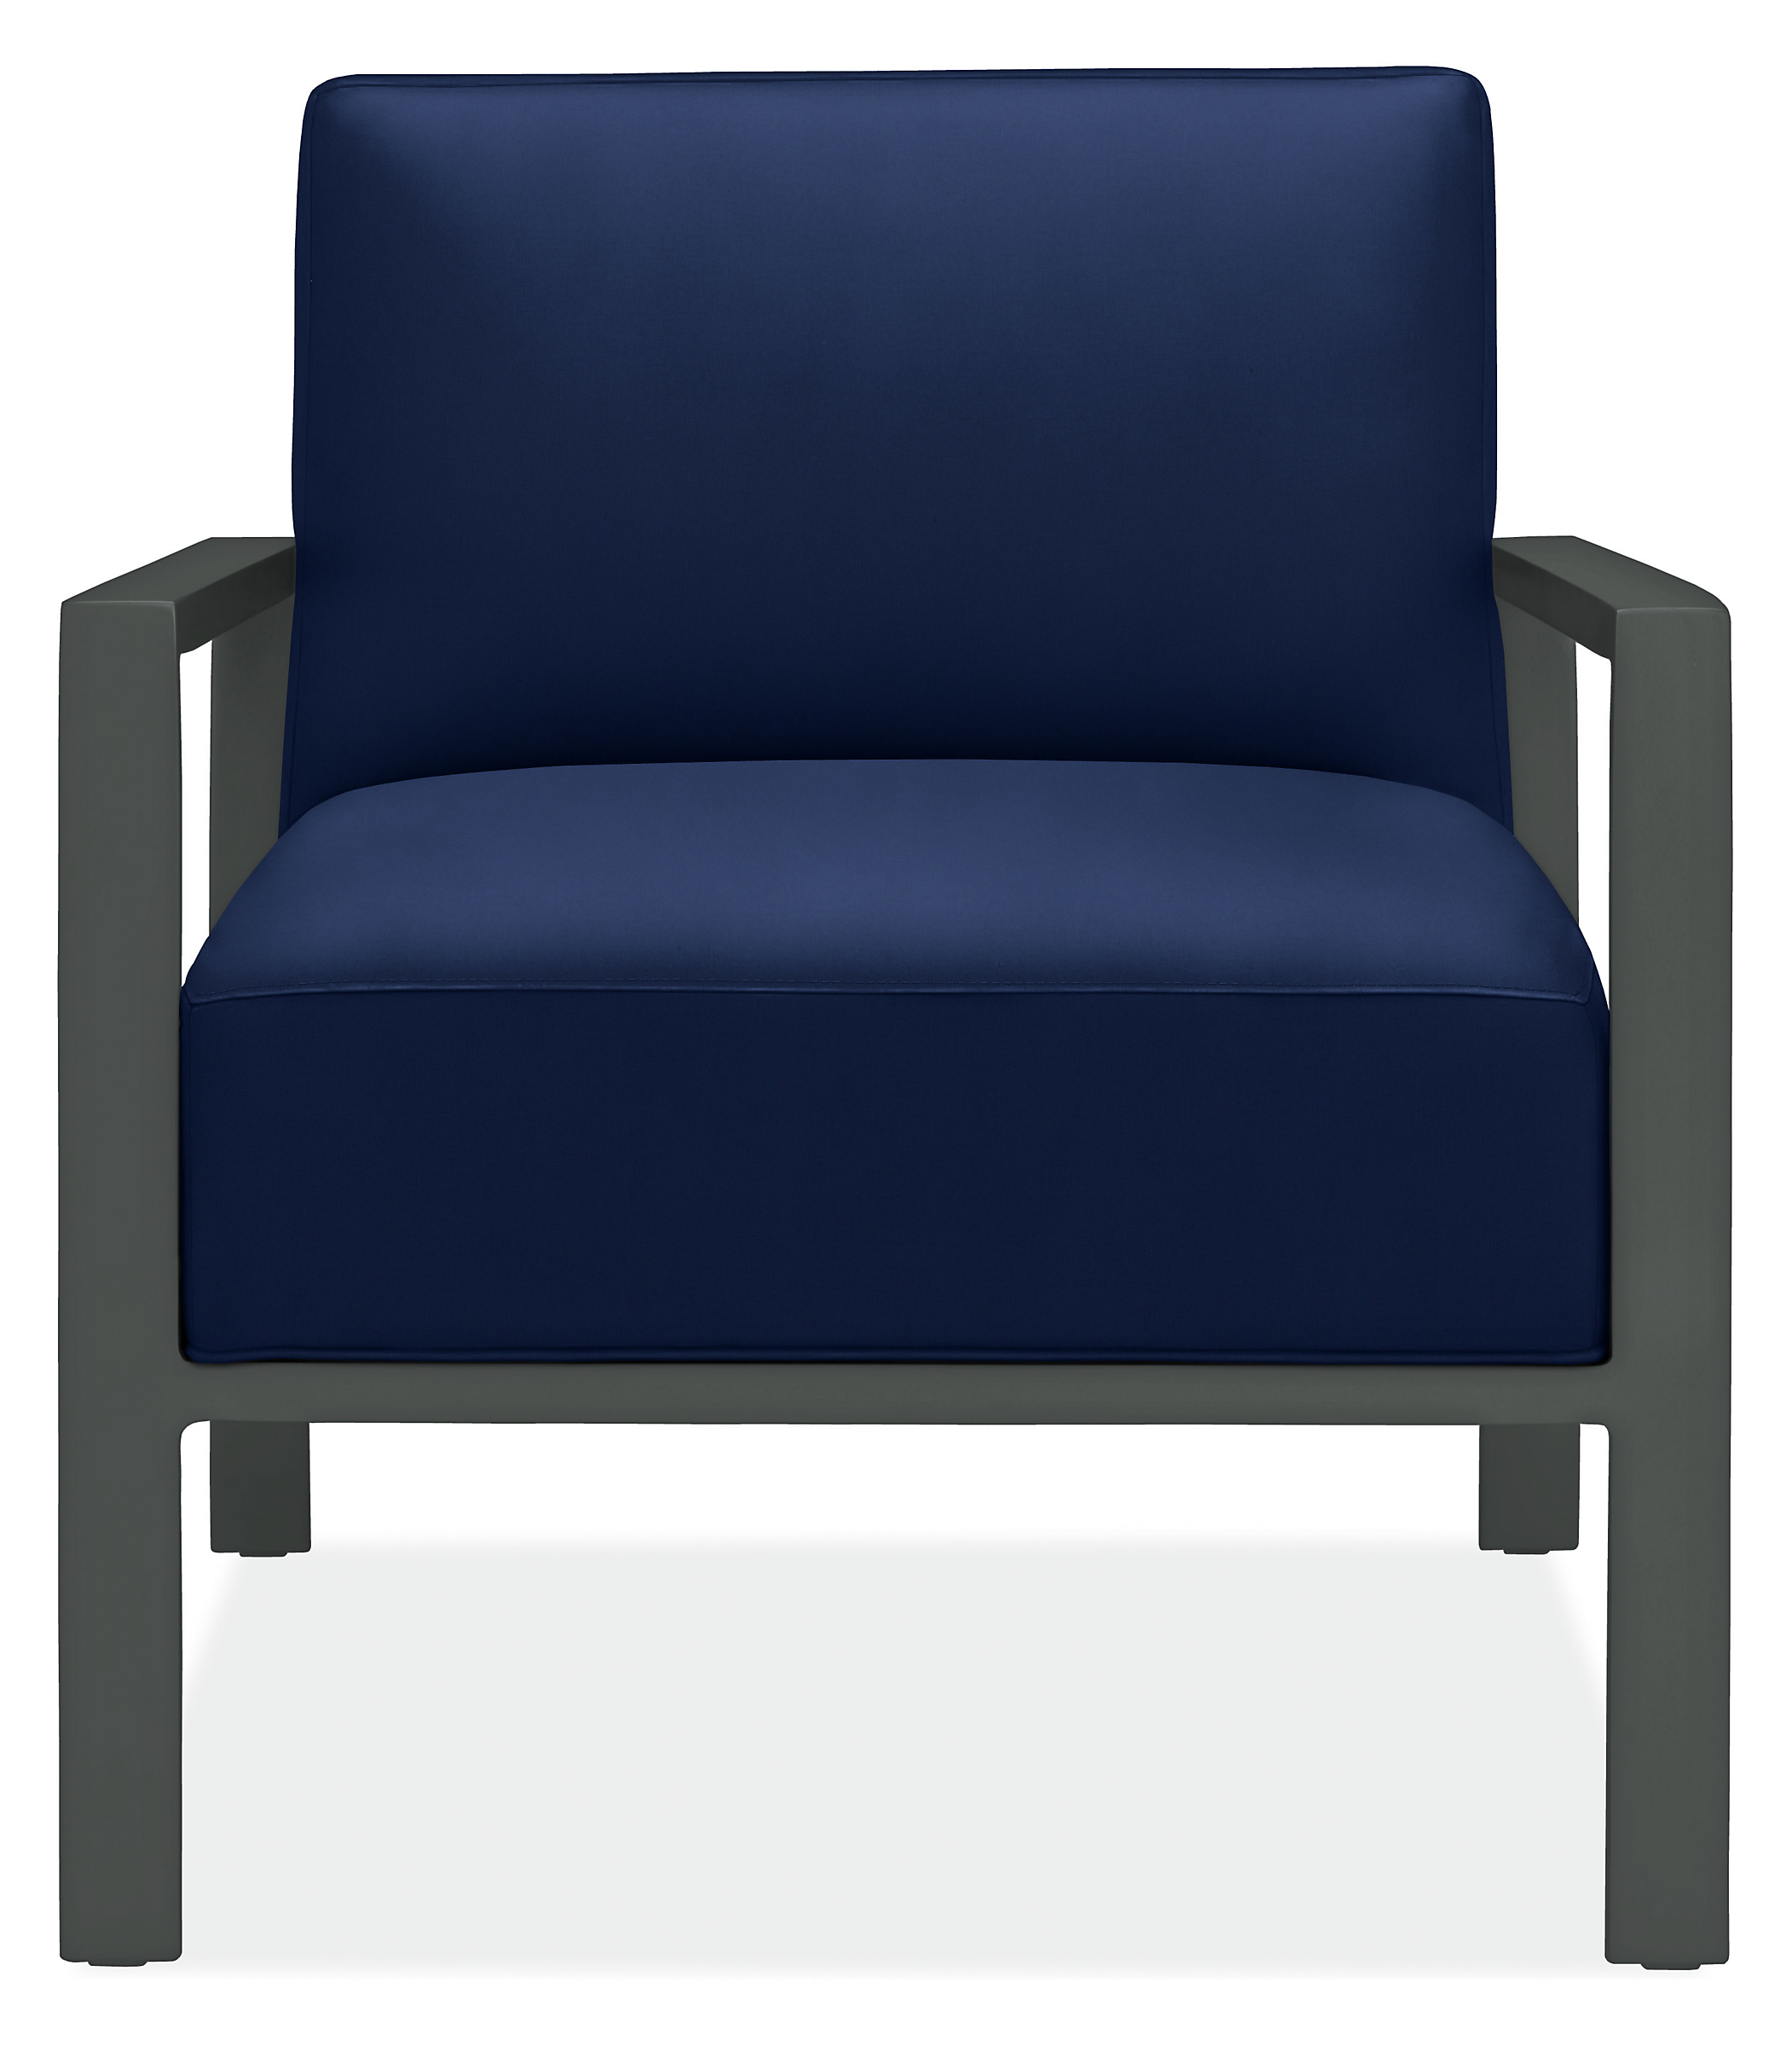 Isles Chair in Sunbrella Canvas Navy with Graphite